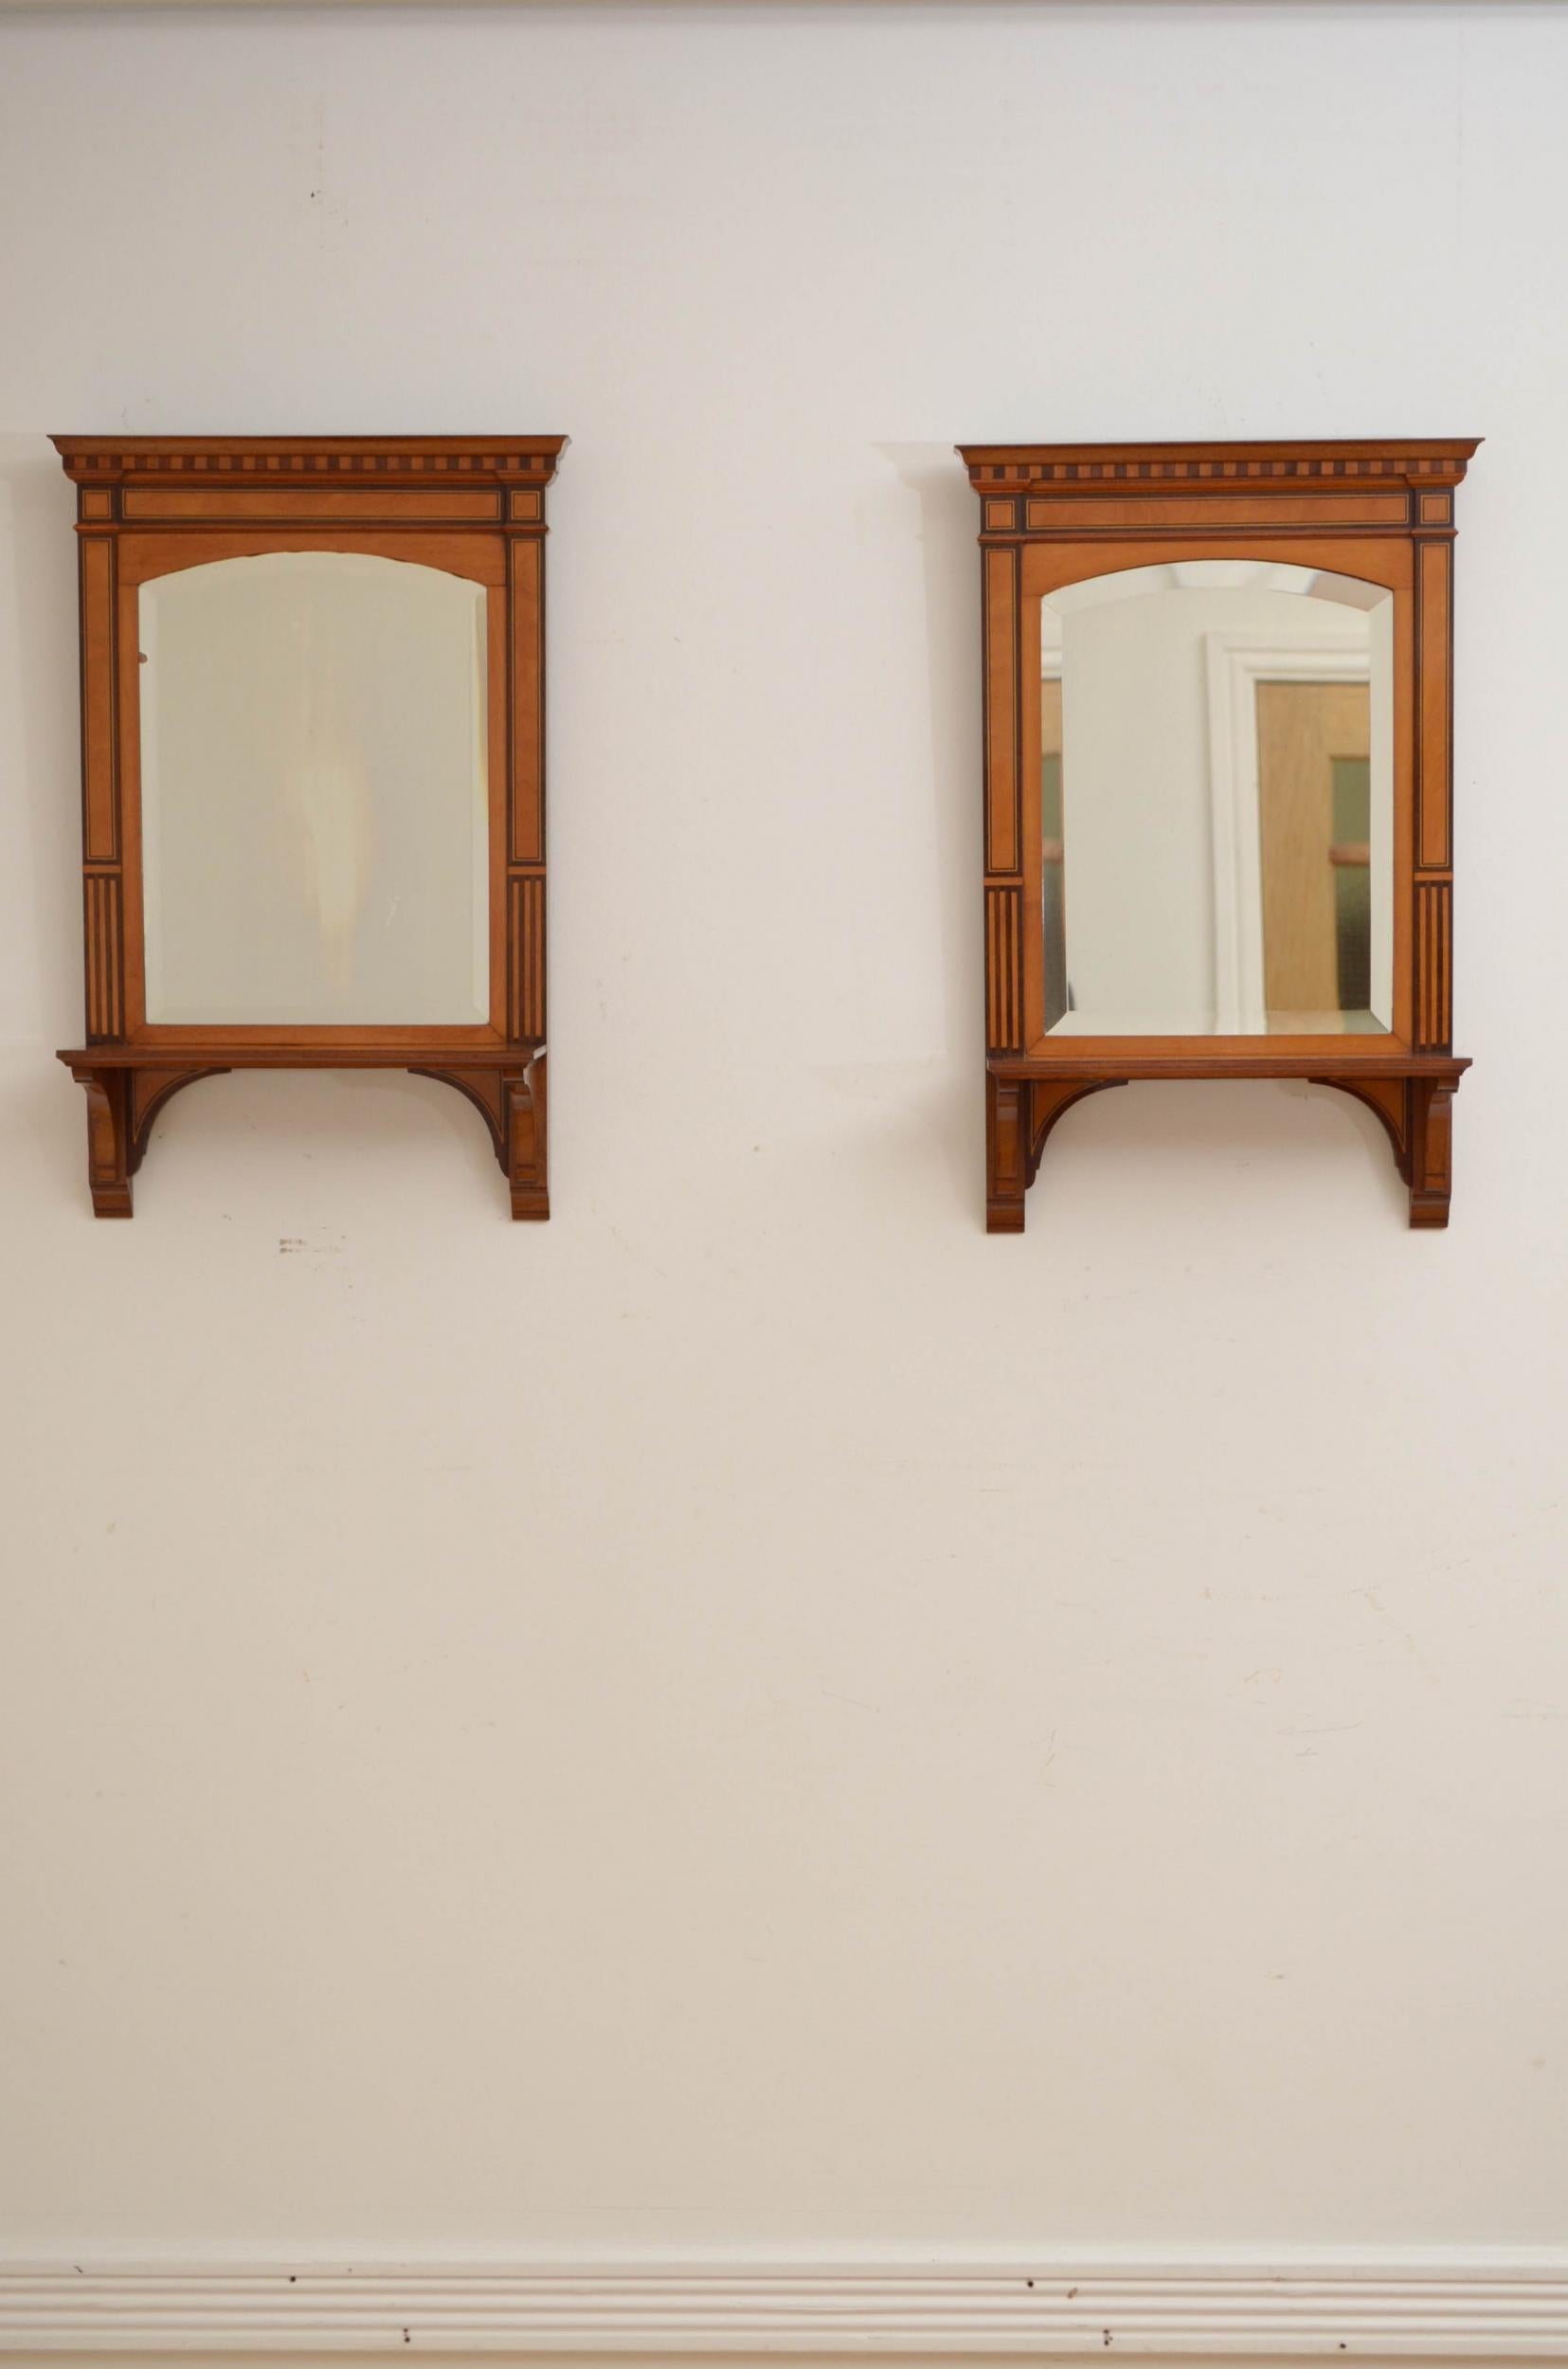 Sn5053, pair of fine quality satinwood wall mirrors, each having original bevelled edge arched mirror with some imperfections in satinwood fame with moulded cornice above dentil inlaid frieze, mahogany banded uprights and crossbanded shelf supported